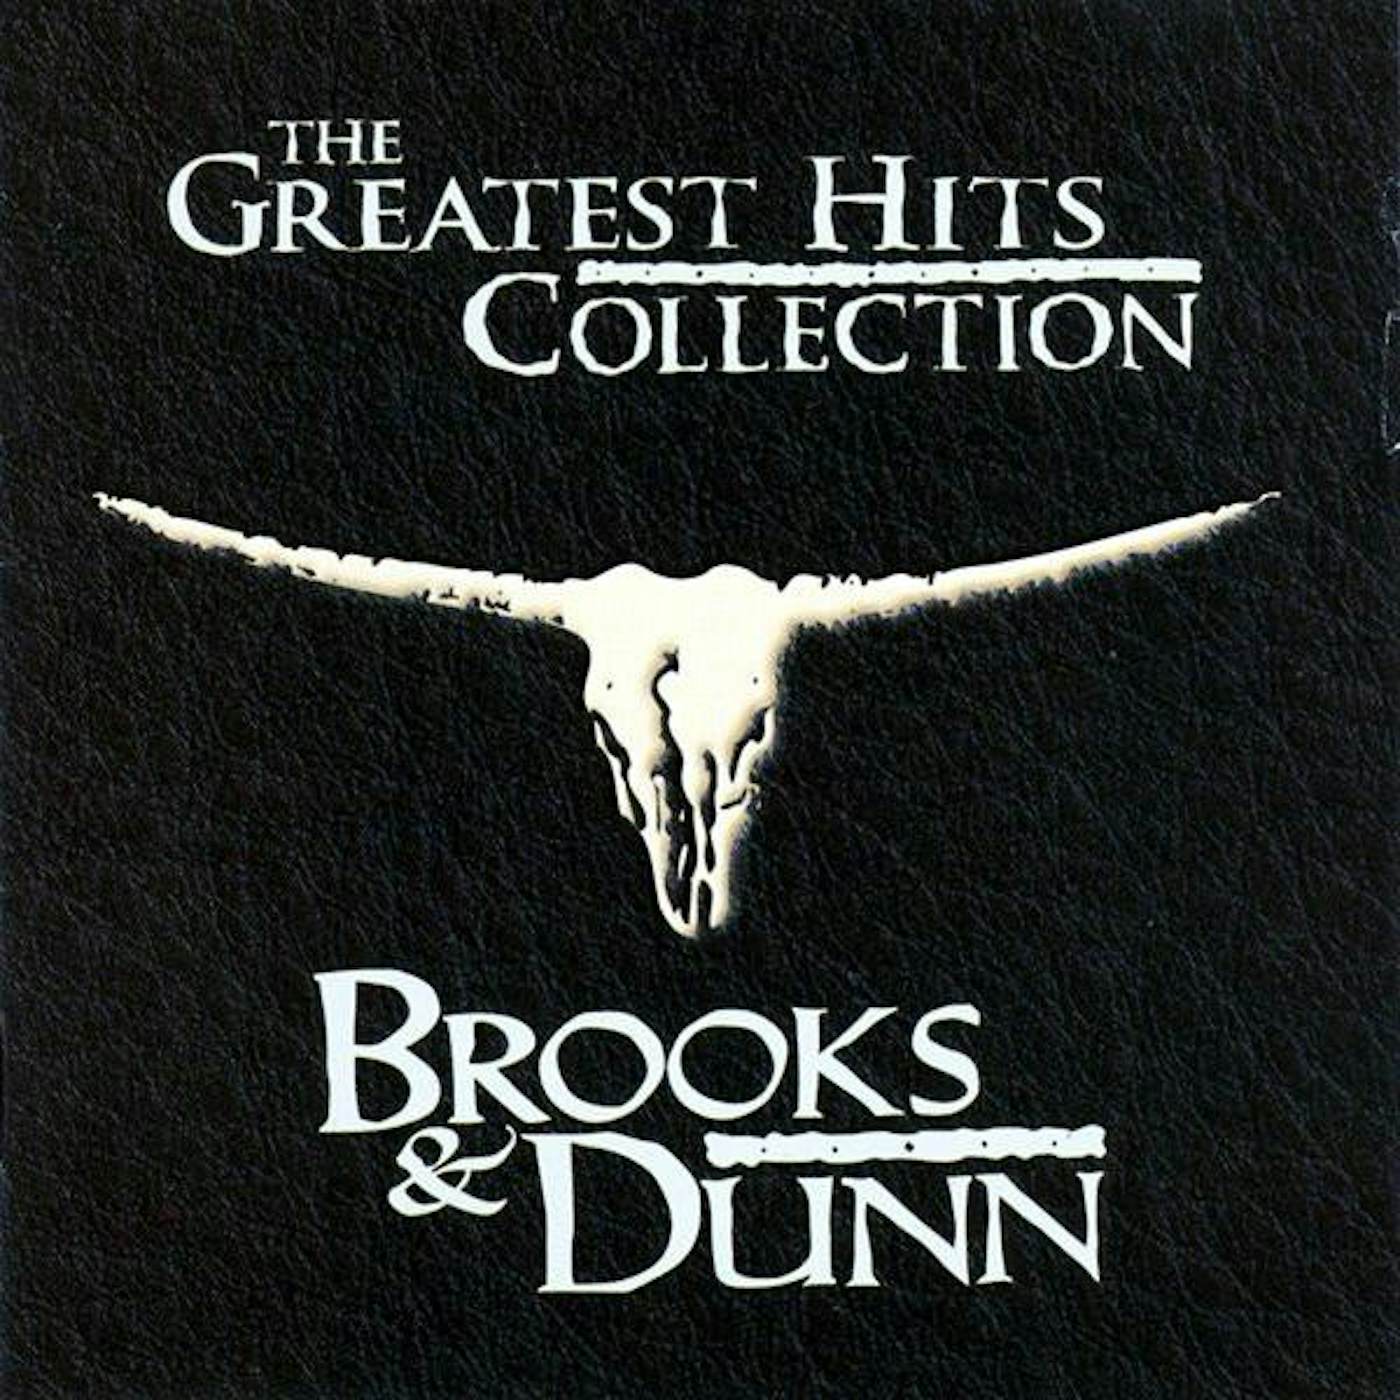 Brooks & Dunn GREATEST HITS COLLECTION CD